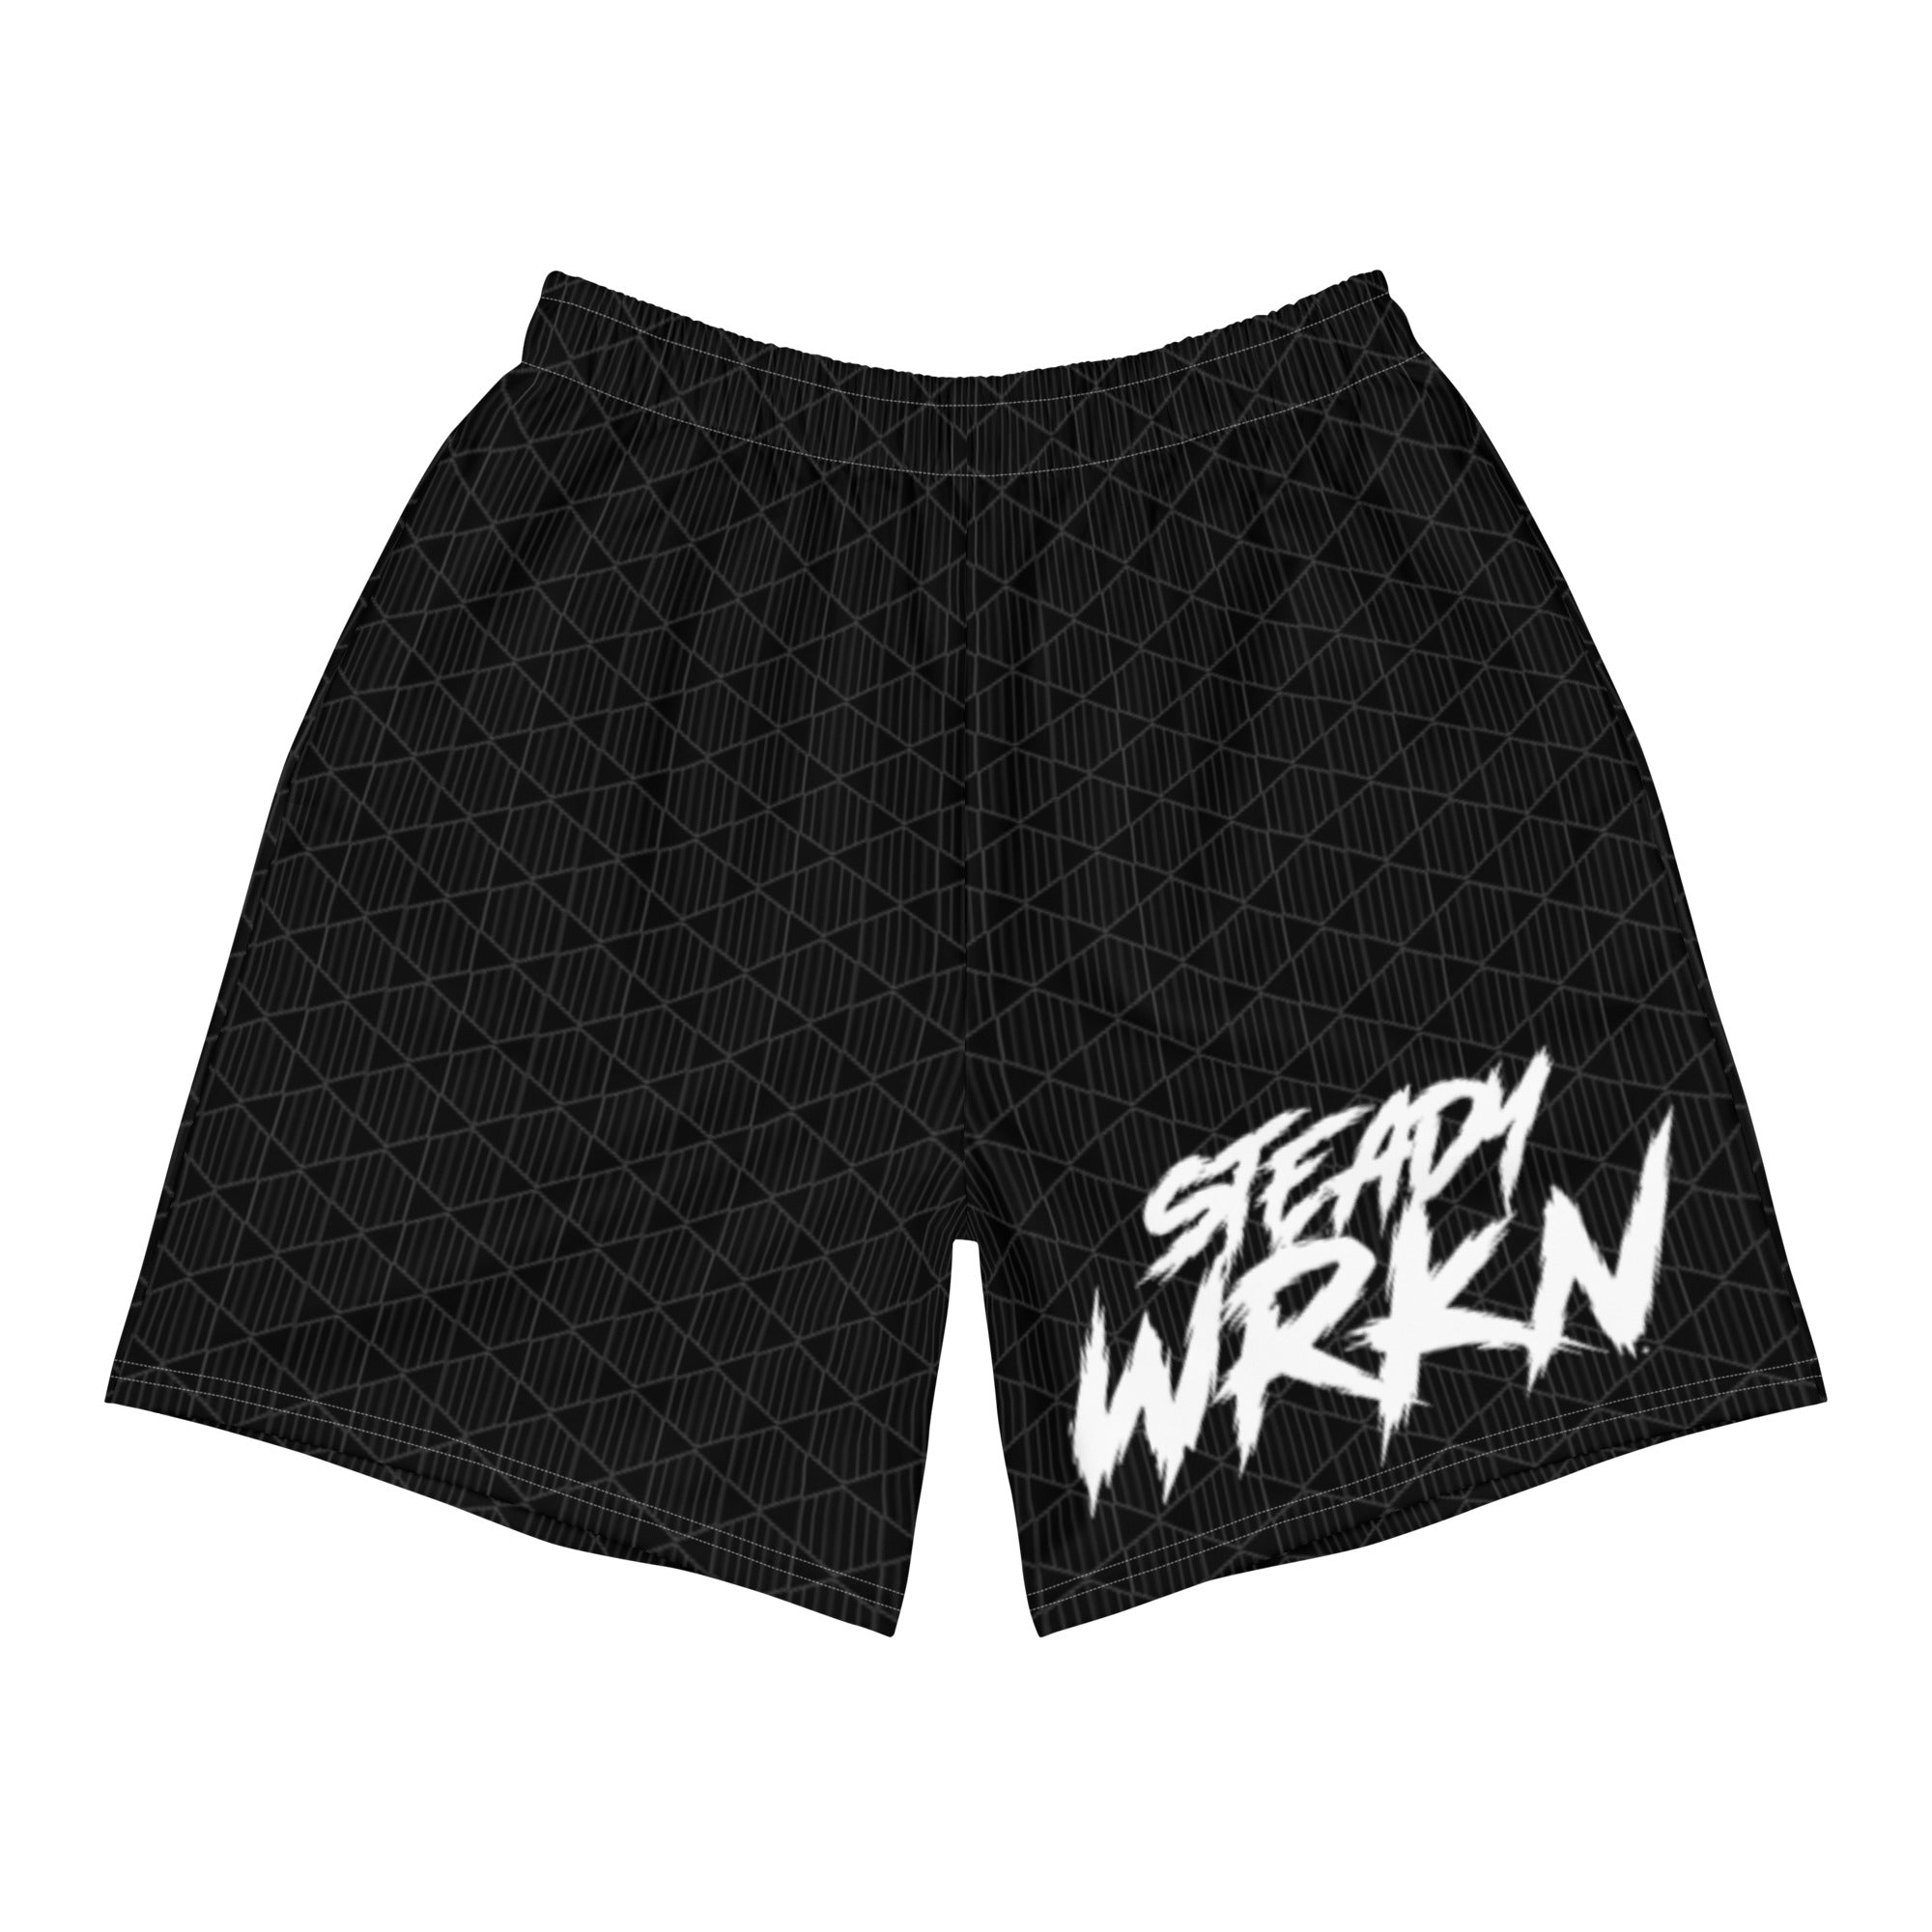 Steady Wrkn "To-Do" Basketball Shorts